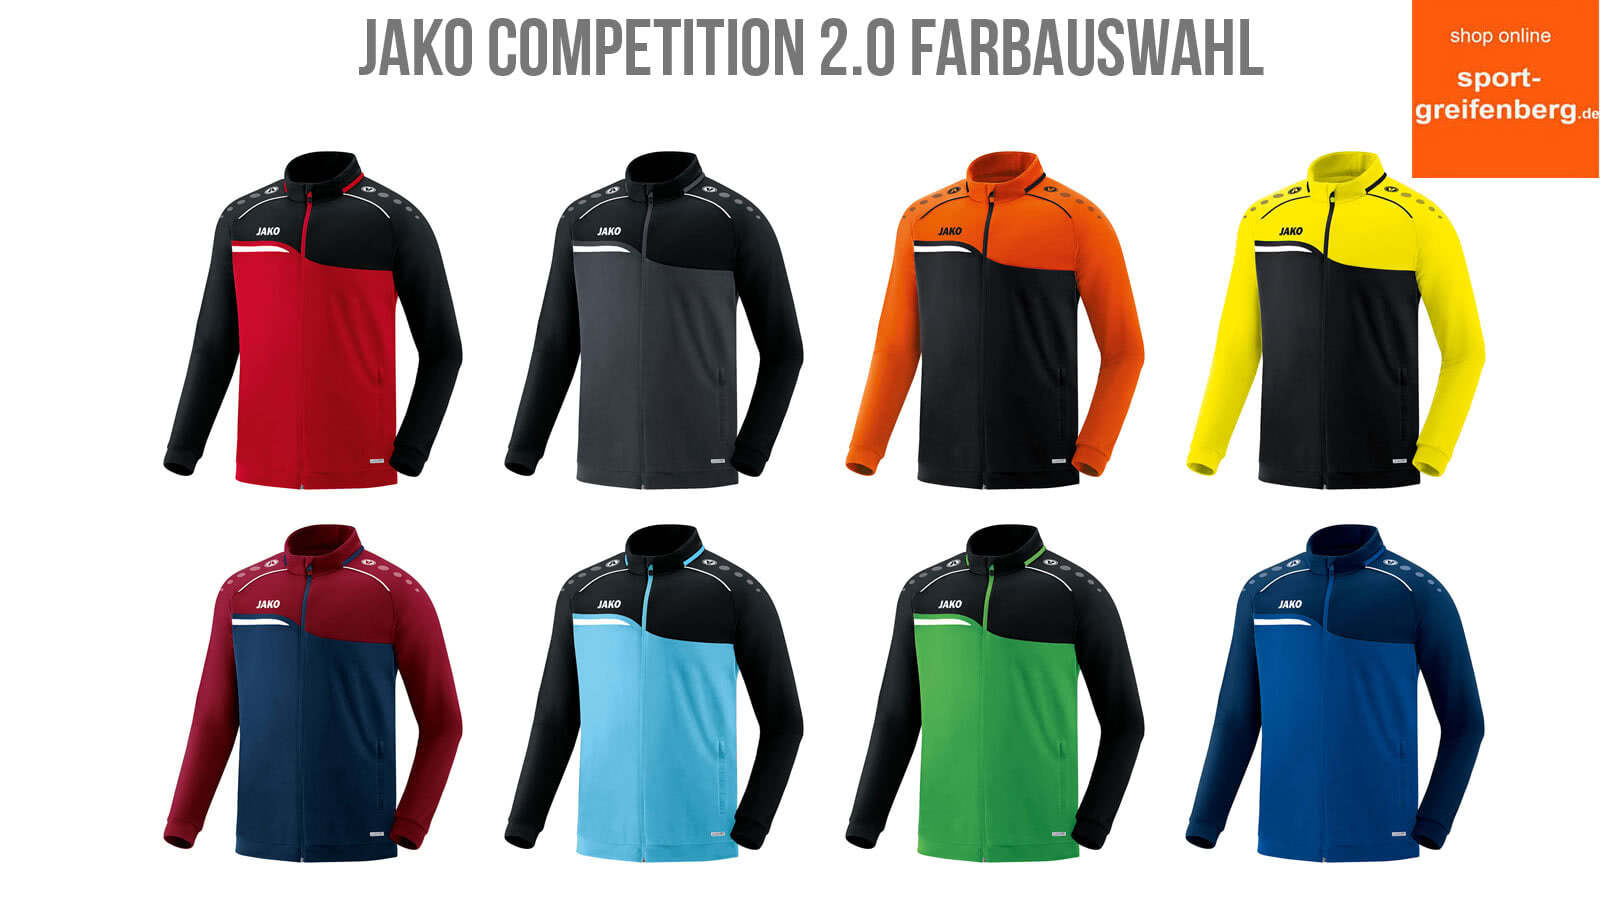 Jako Competition 2.0 Farbauswahl der Sportbekleidung